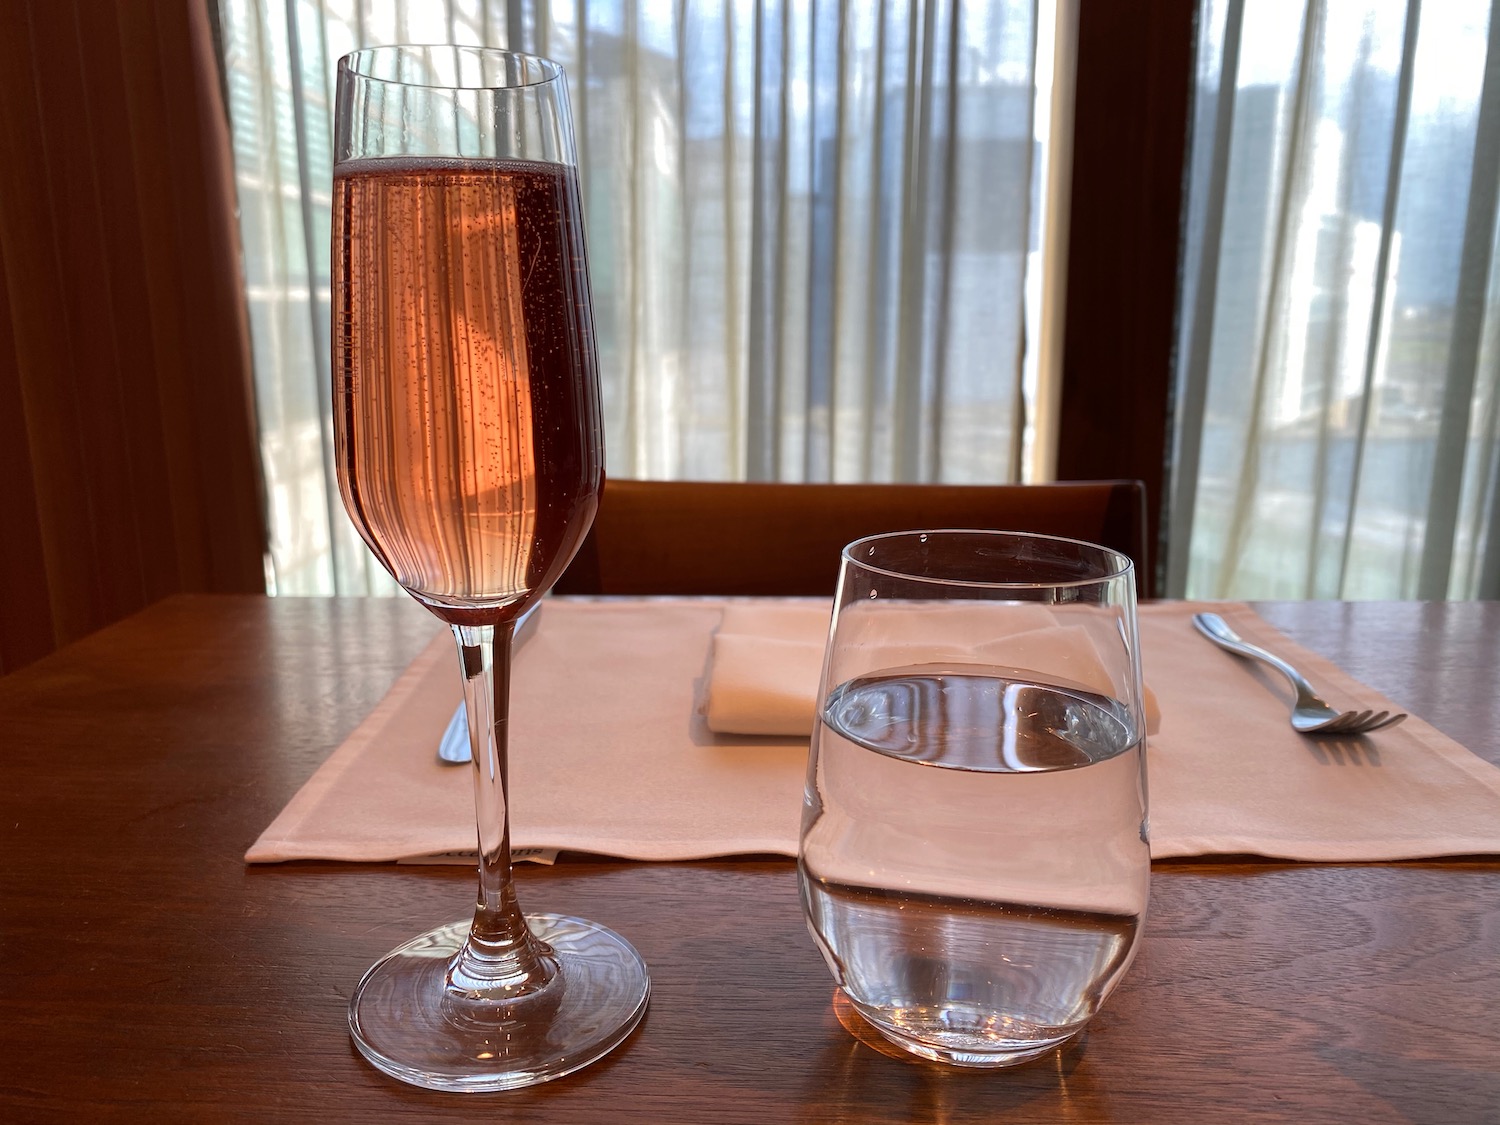 a glass of wine next to a glass of water